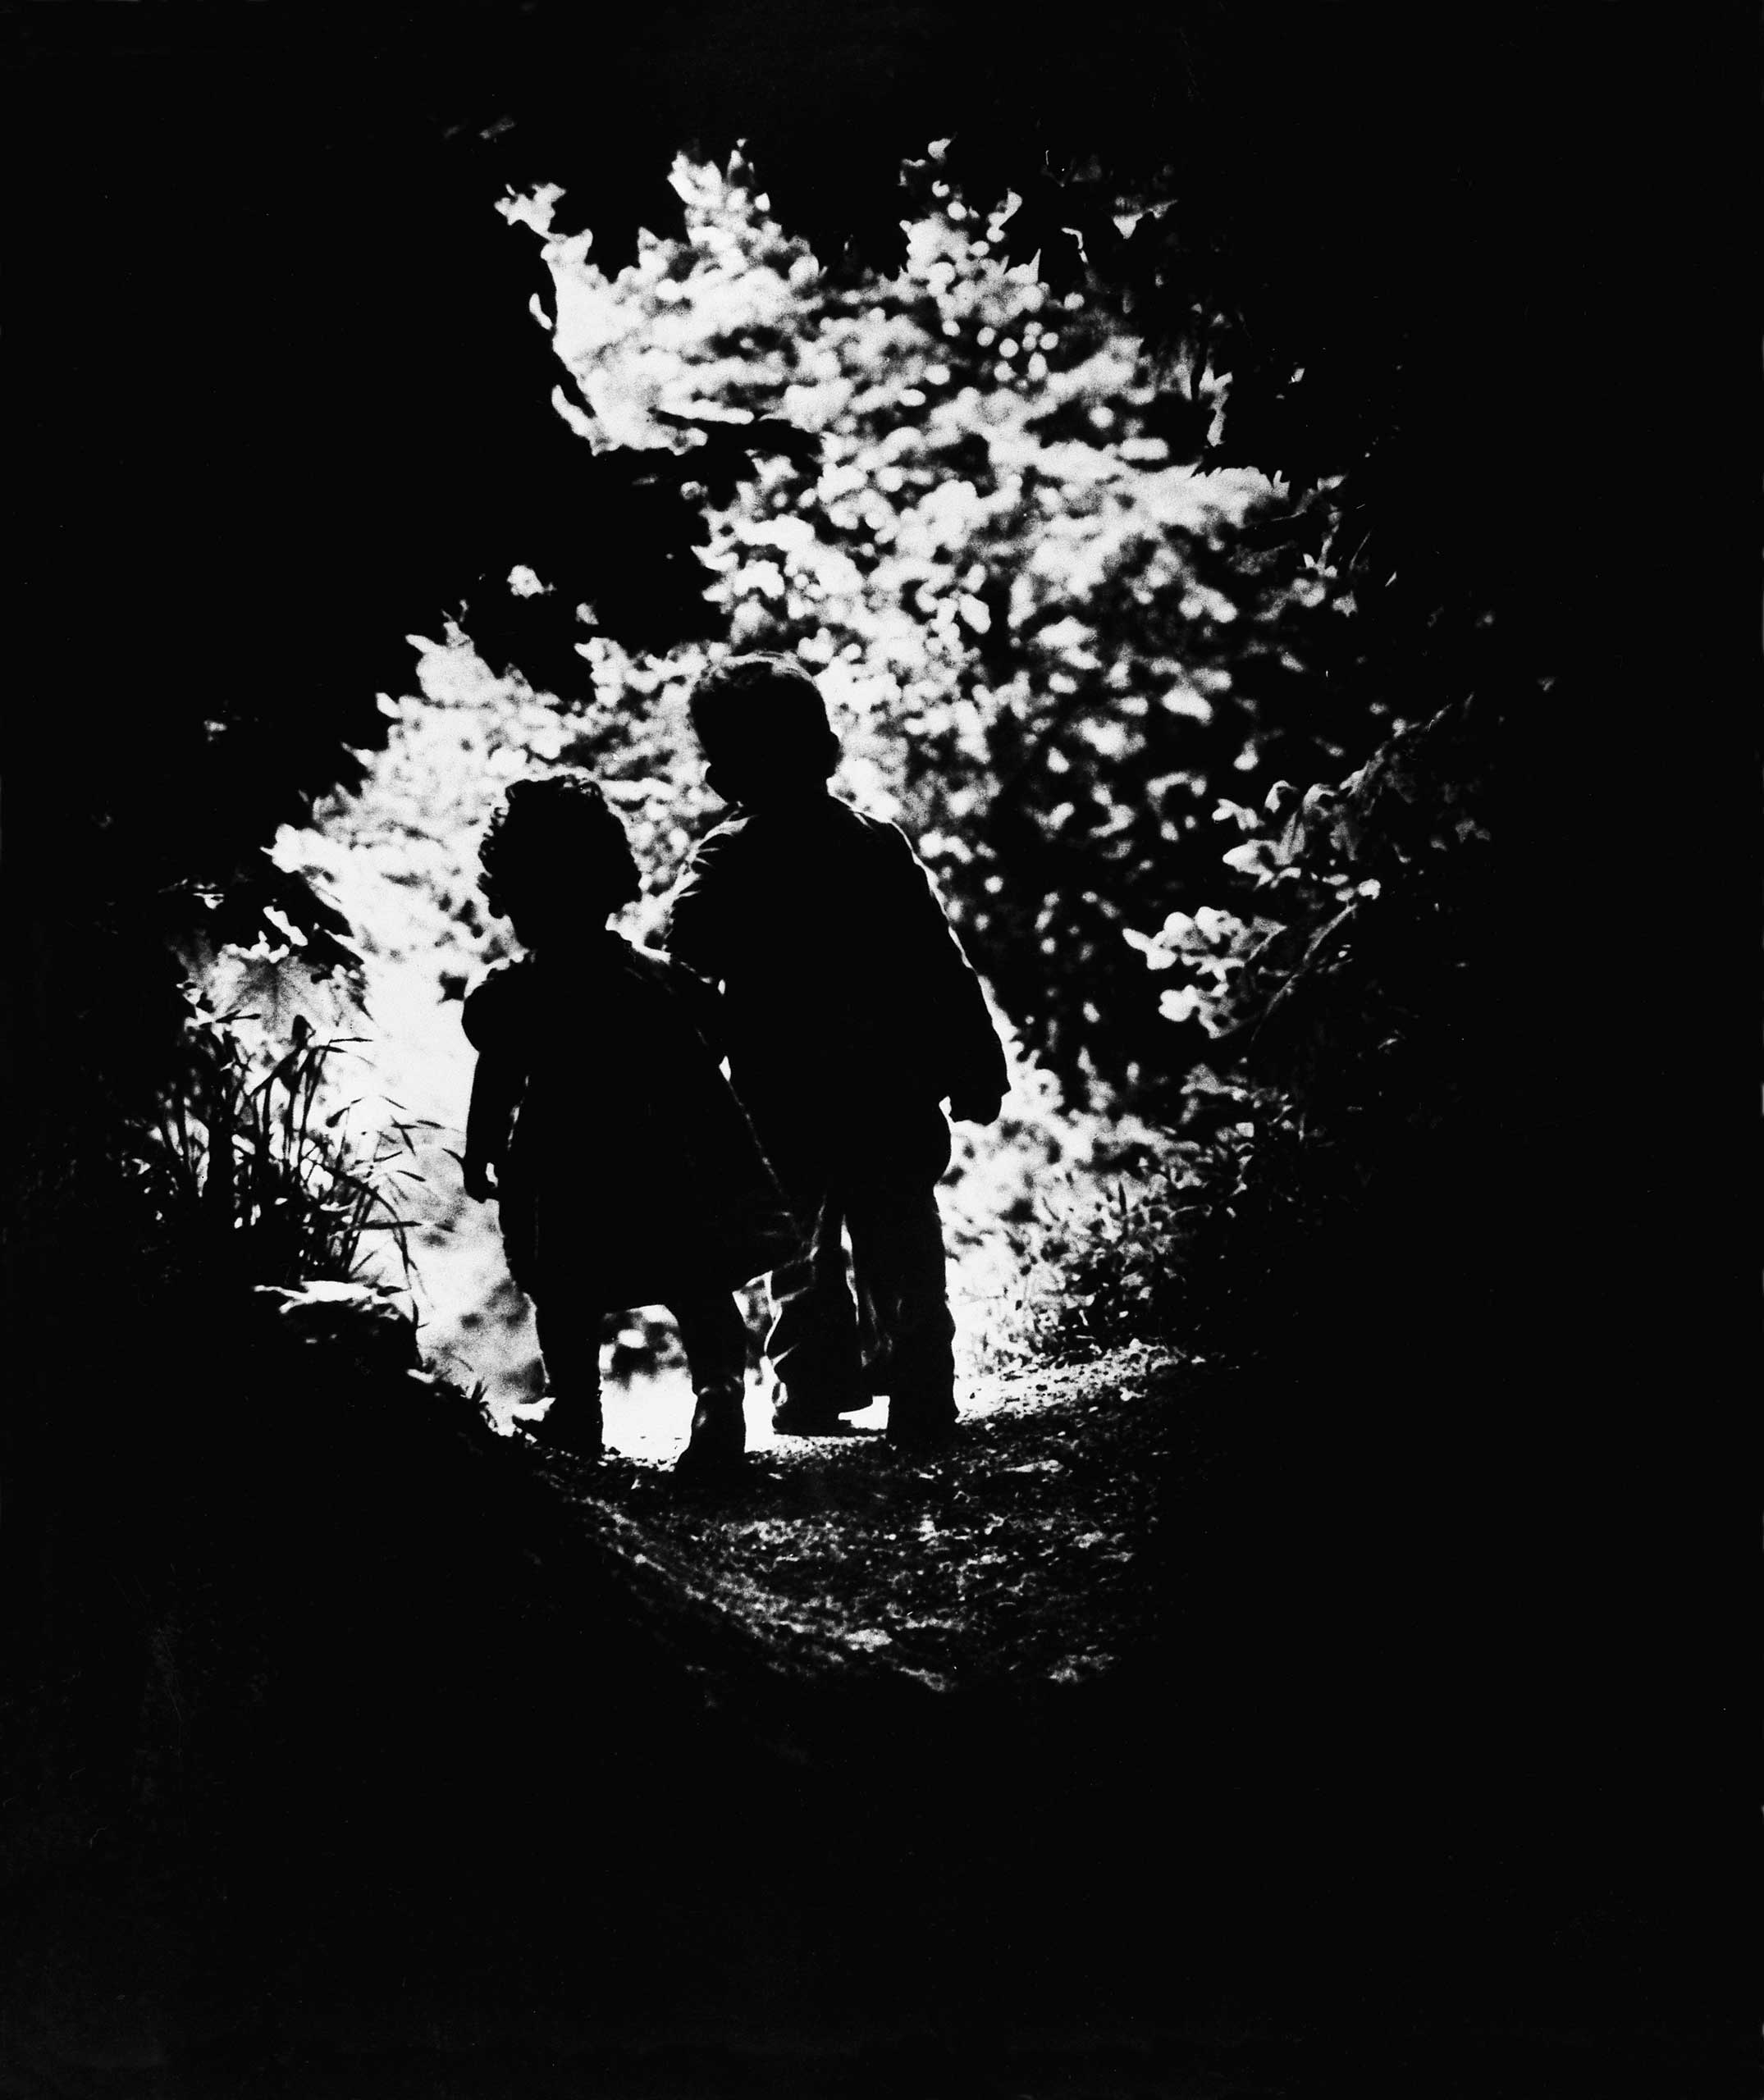 1946 | LIFE photographer W. Eugene Smith's children, Juanita and Patrick, walk hand-in-hand into a clearing in 1946. The photo was the closing image in Edward Steichen's now-legendary 1955 MoMA exhibition, The Family of Man, and was one of the very first that Smith, wounded while working in the Pacific in World War II, made after the war.